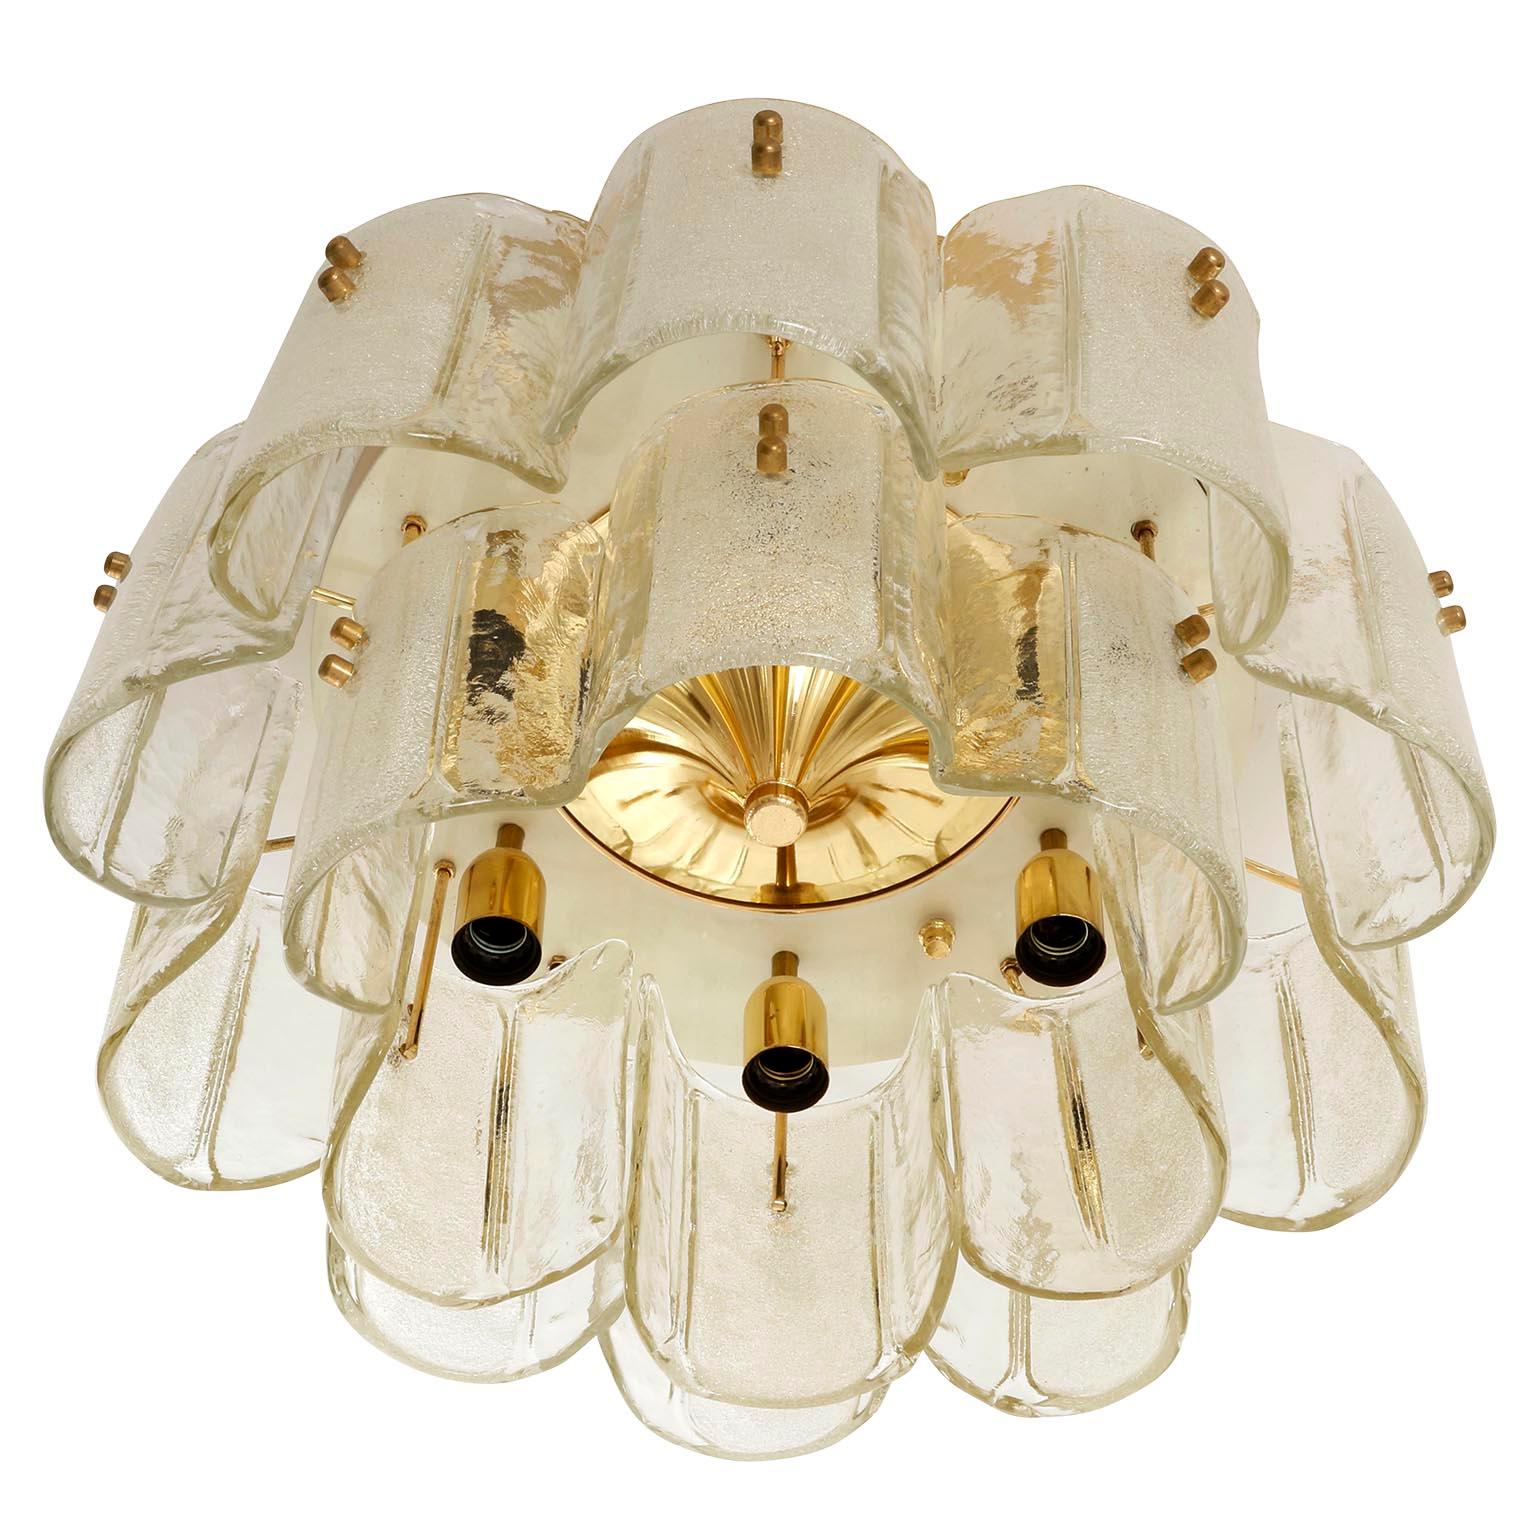 An extra large flushmount light manufactured in midcentury, circa 1970.
A polished brass and white enameled backplate holds 16 curved art glass elements with brass bolts.
The lamp takes six medium or standard screw base bulbs up to max. 60W per bulb